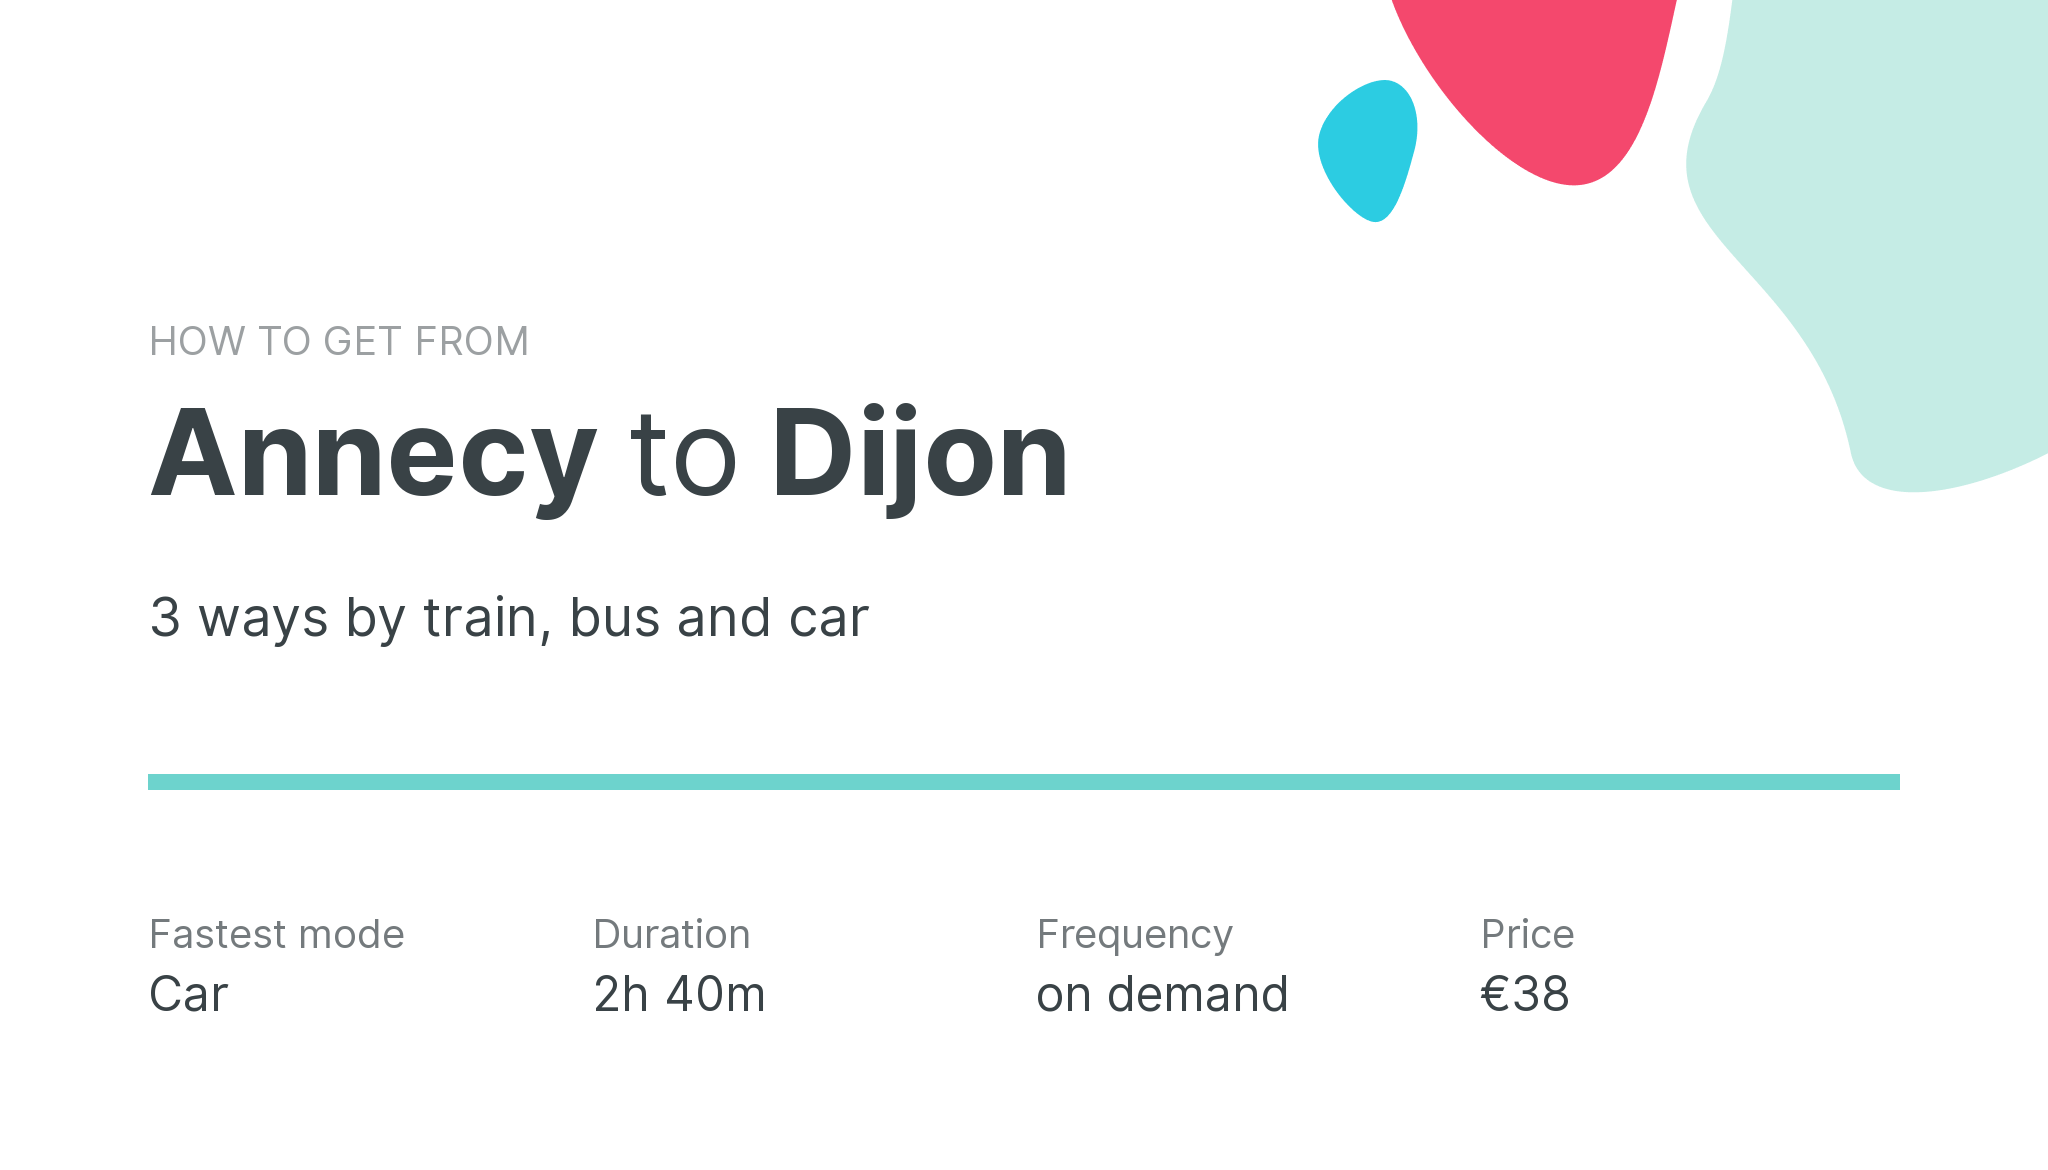 How do I get from Annecy to Dijon